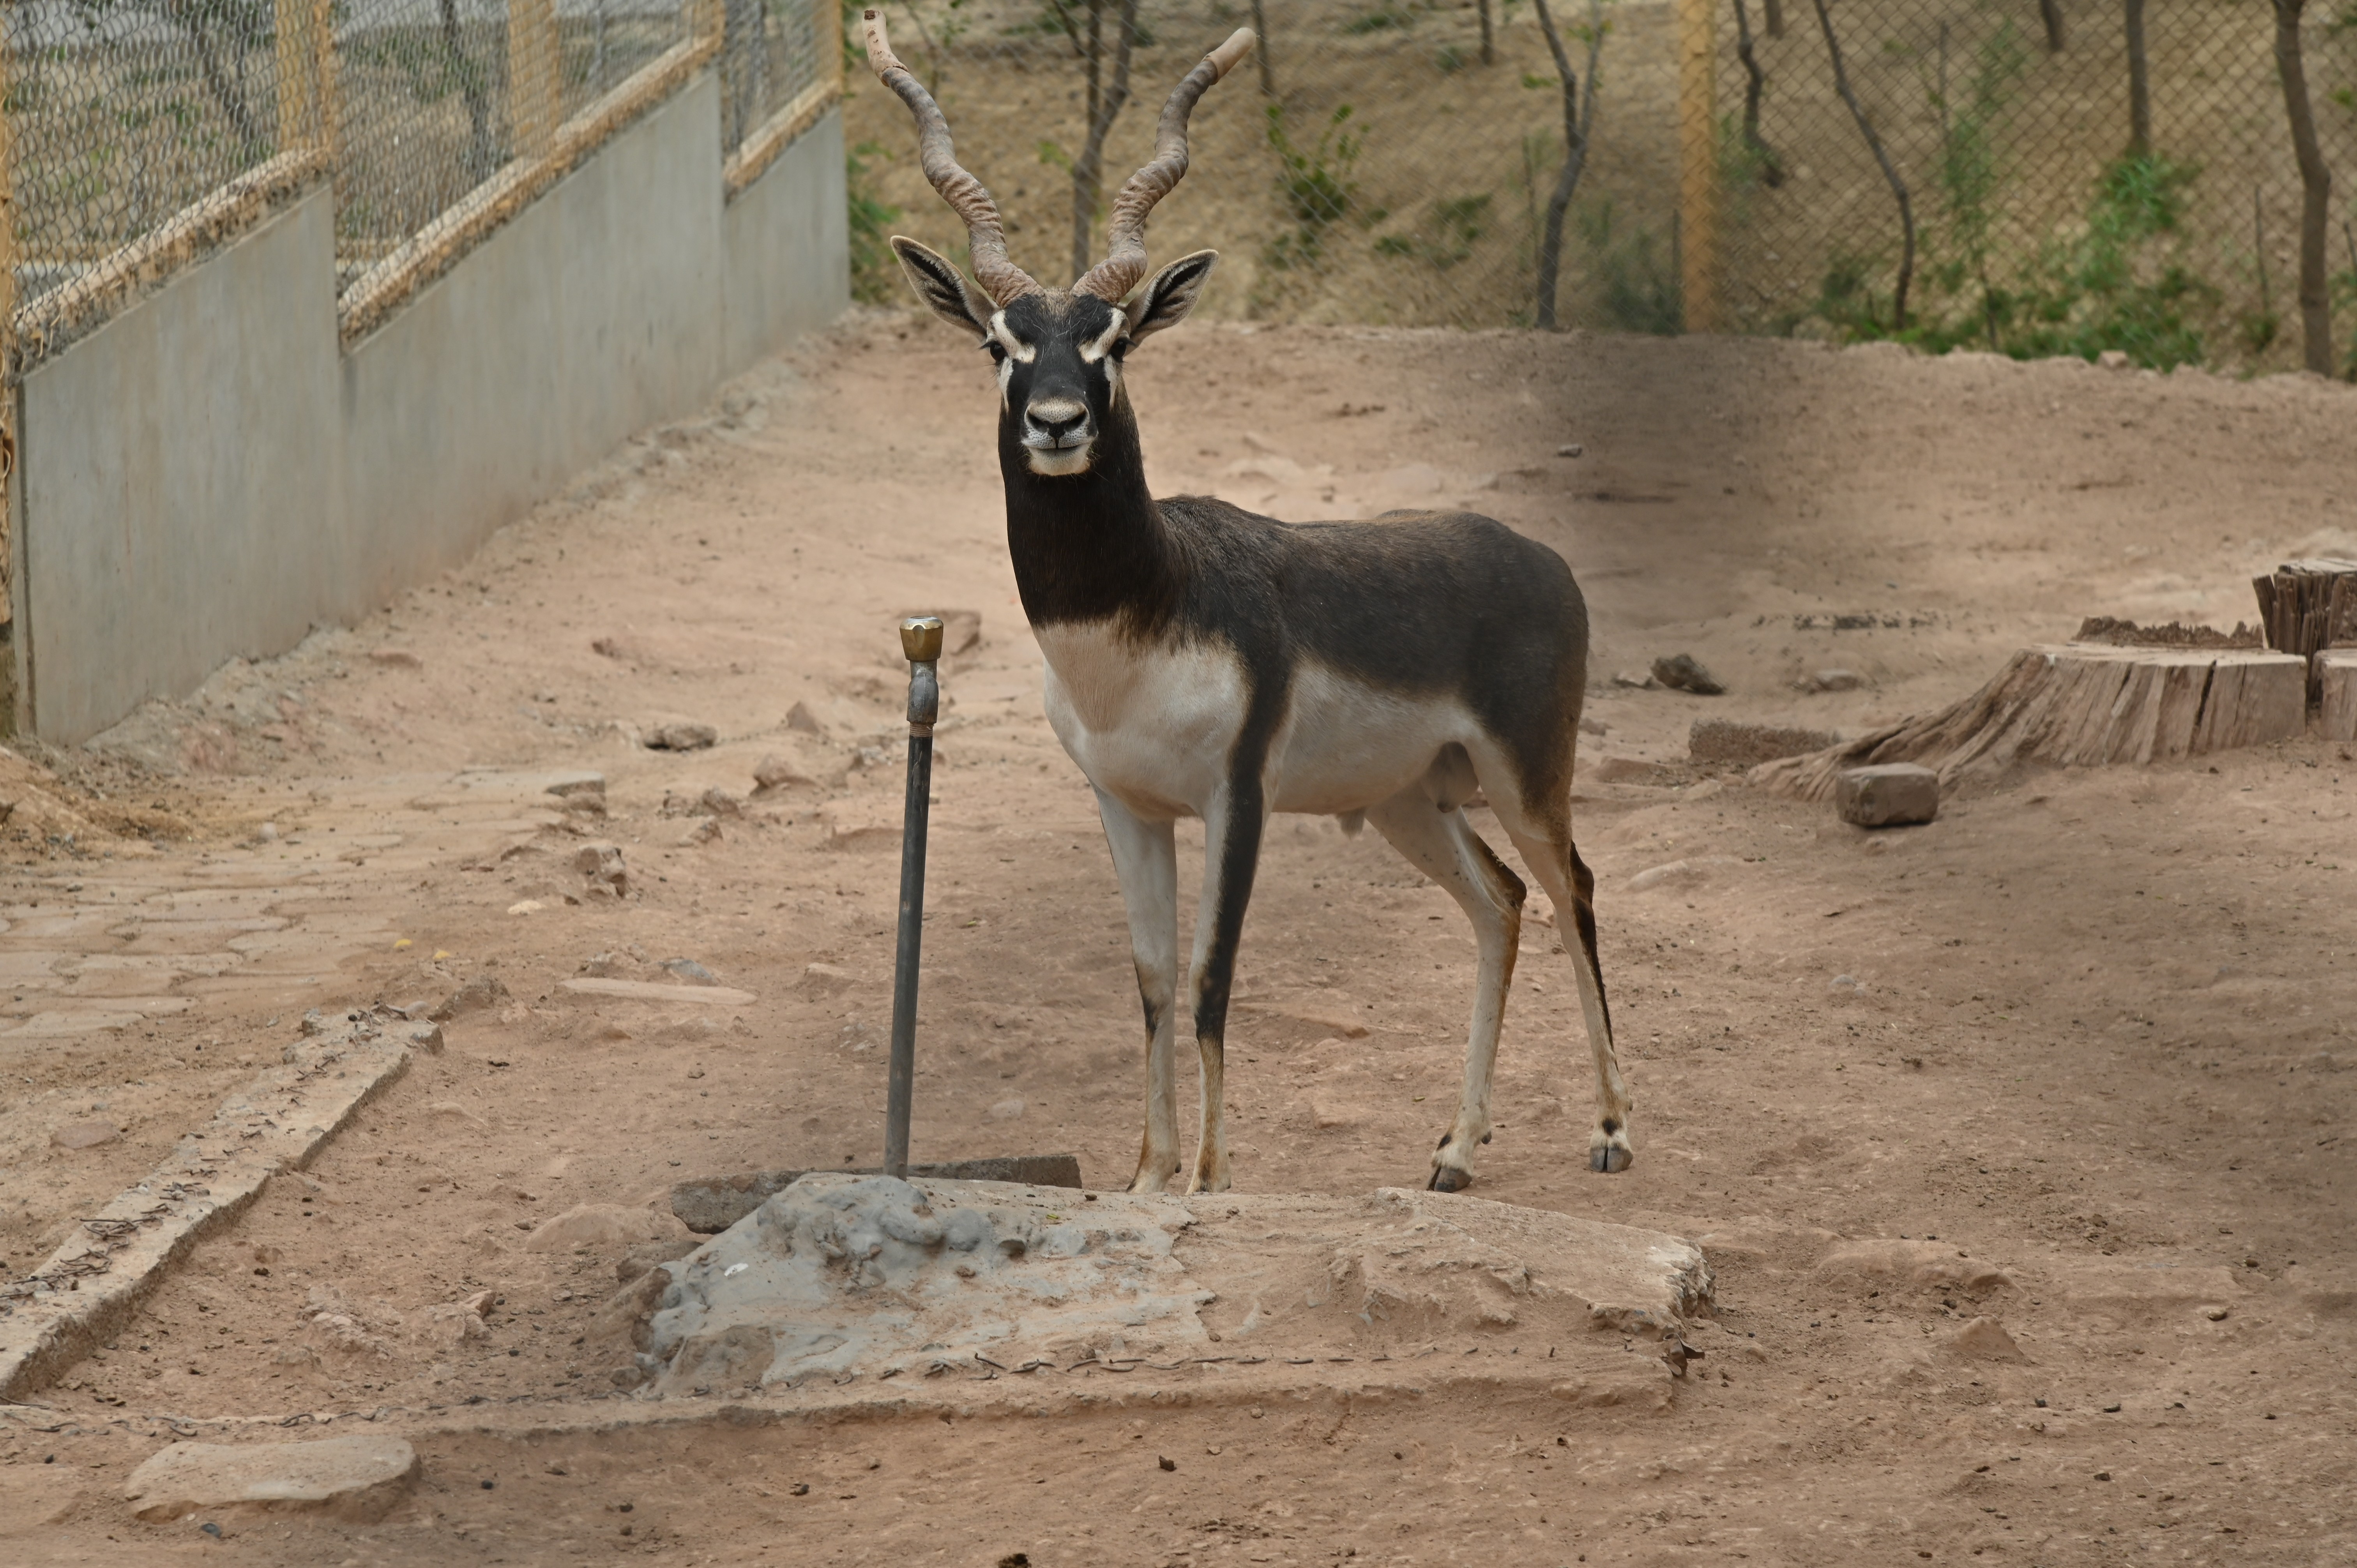 A blackbuck, also known as the Indian antelope